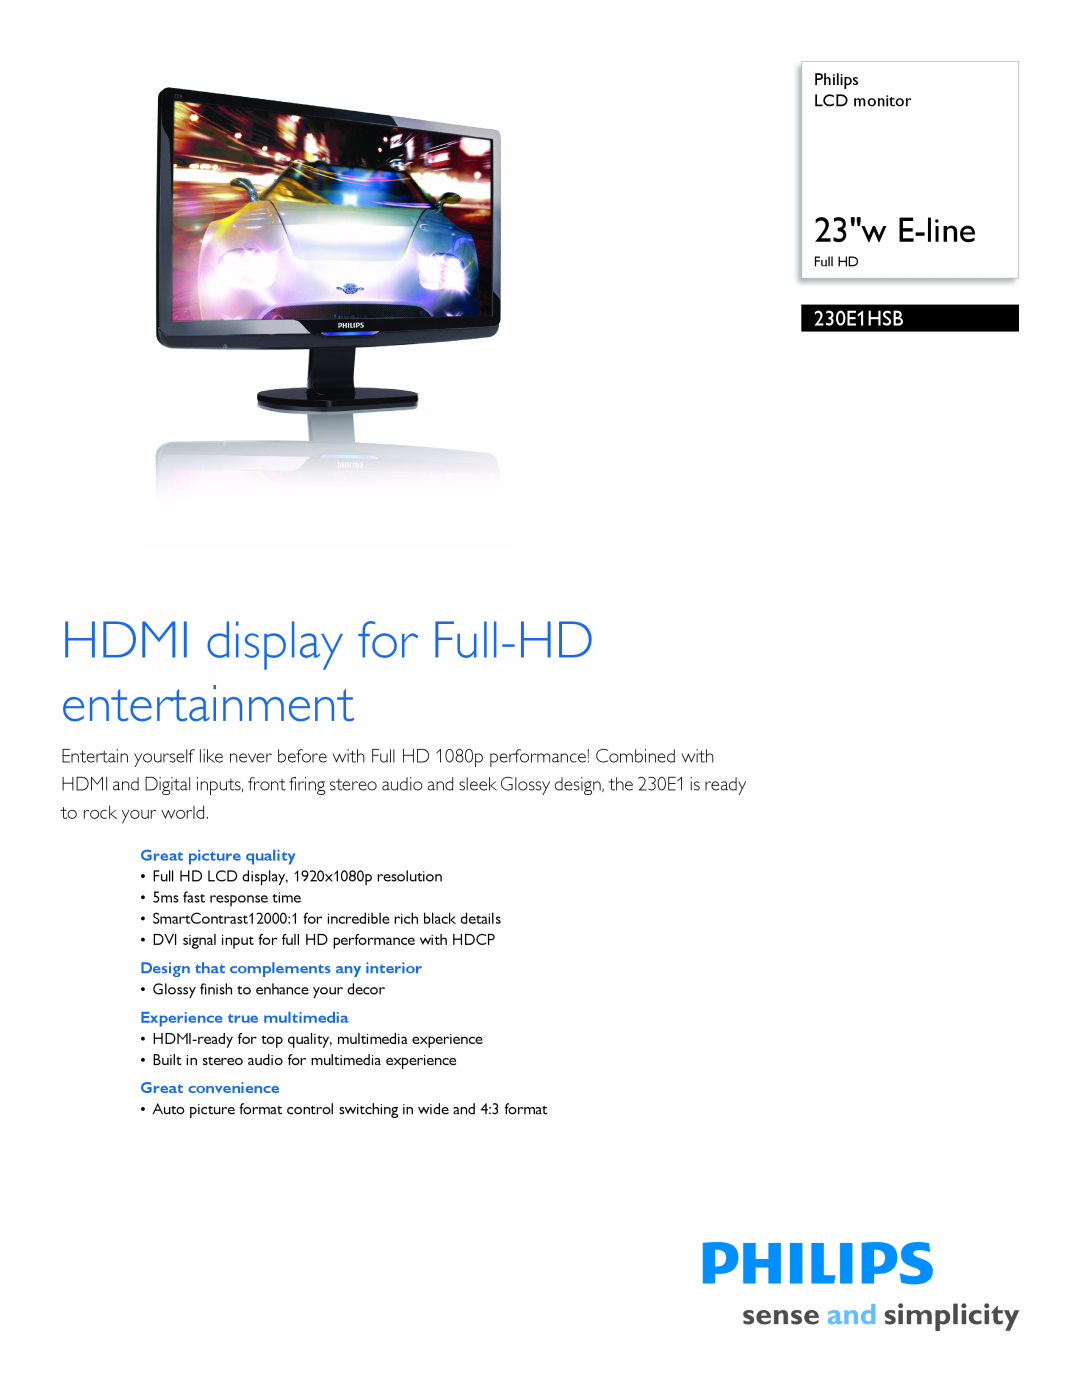 Philips 230E1HSB manual Philips LCD monitor, Great picture quality, Design that complements any interior, 23w E-line 